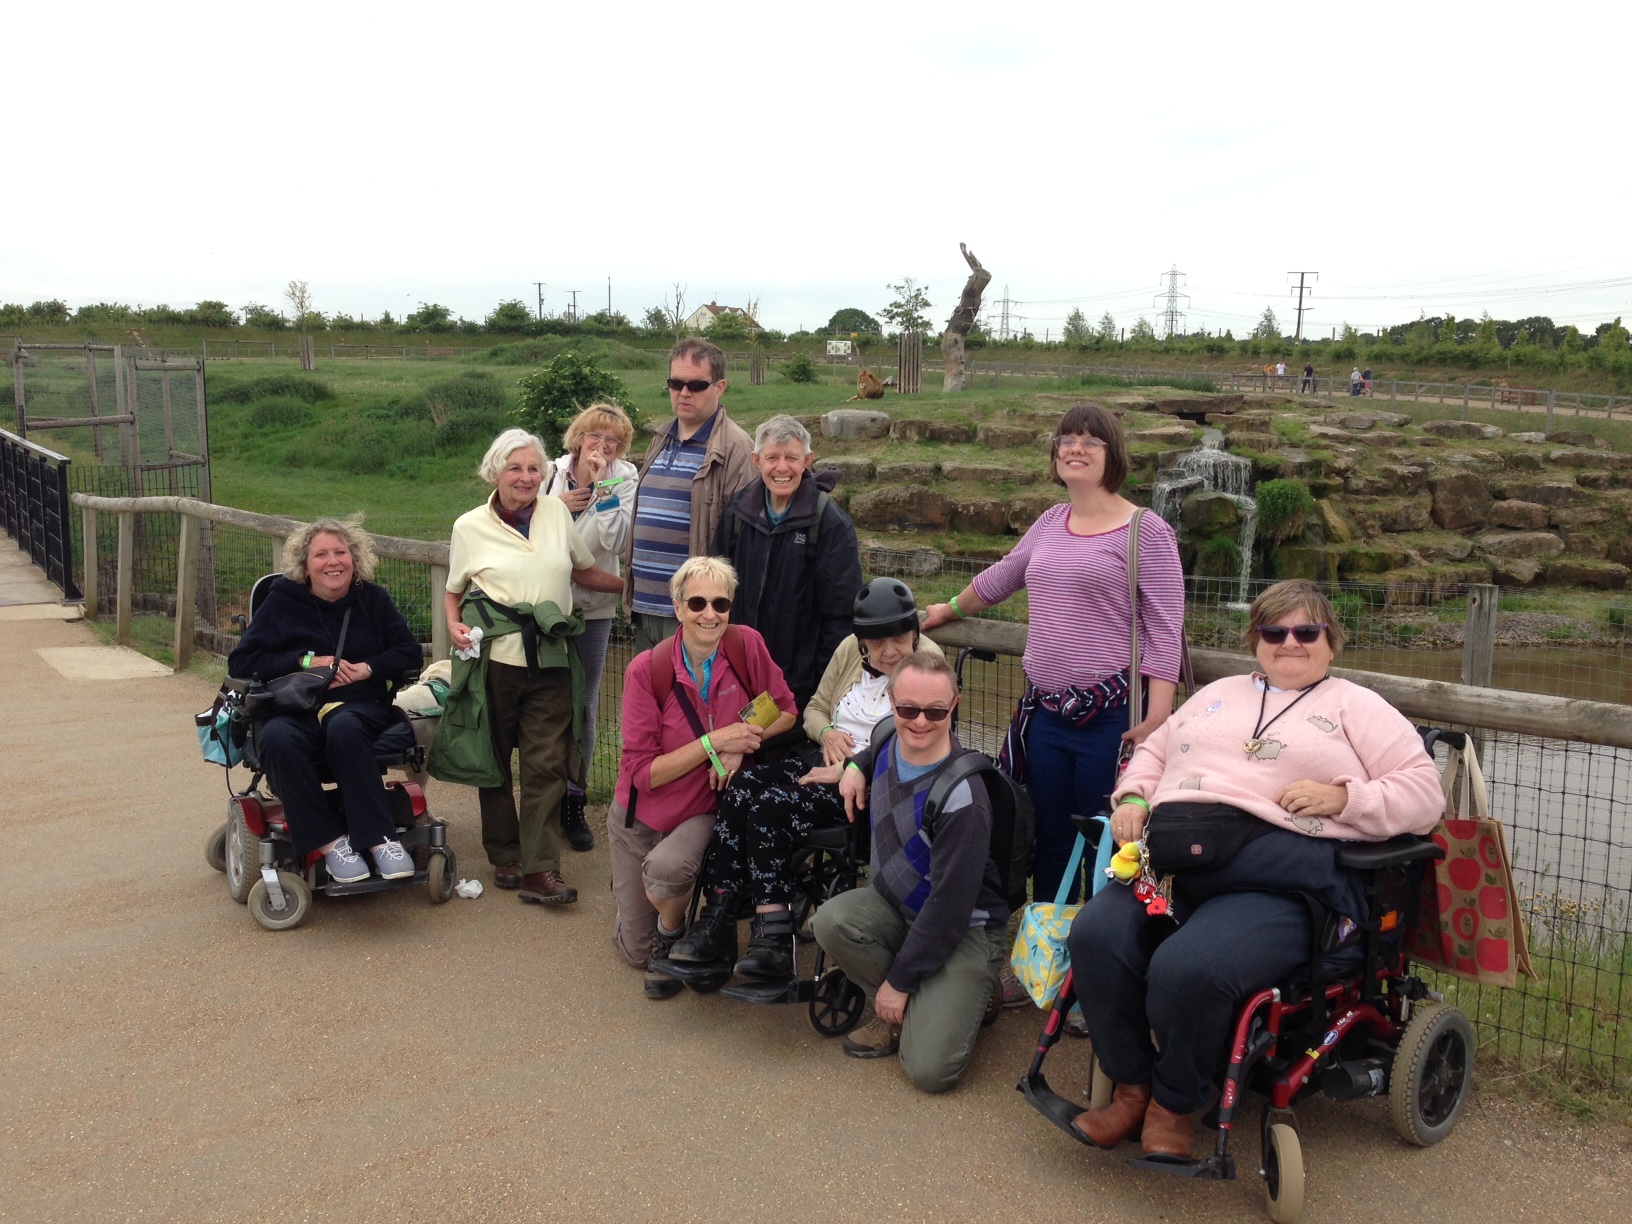 A group of people including wheelchair users standing by an animal enclosure.